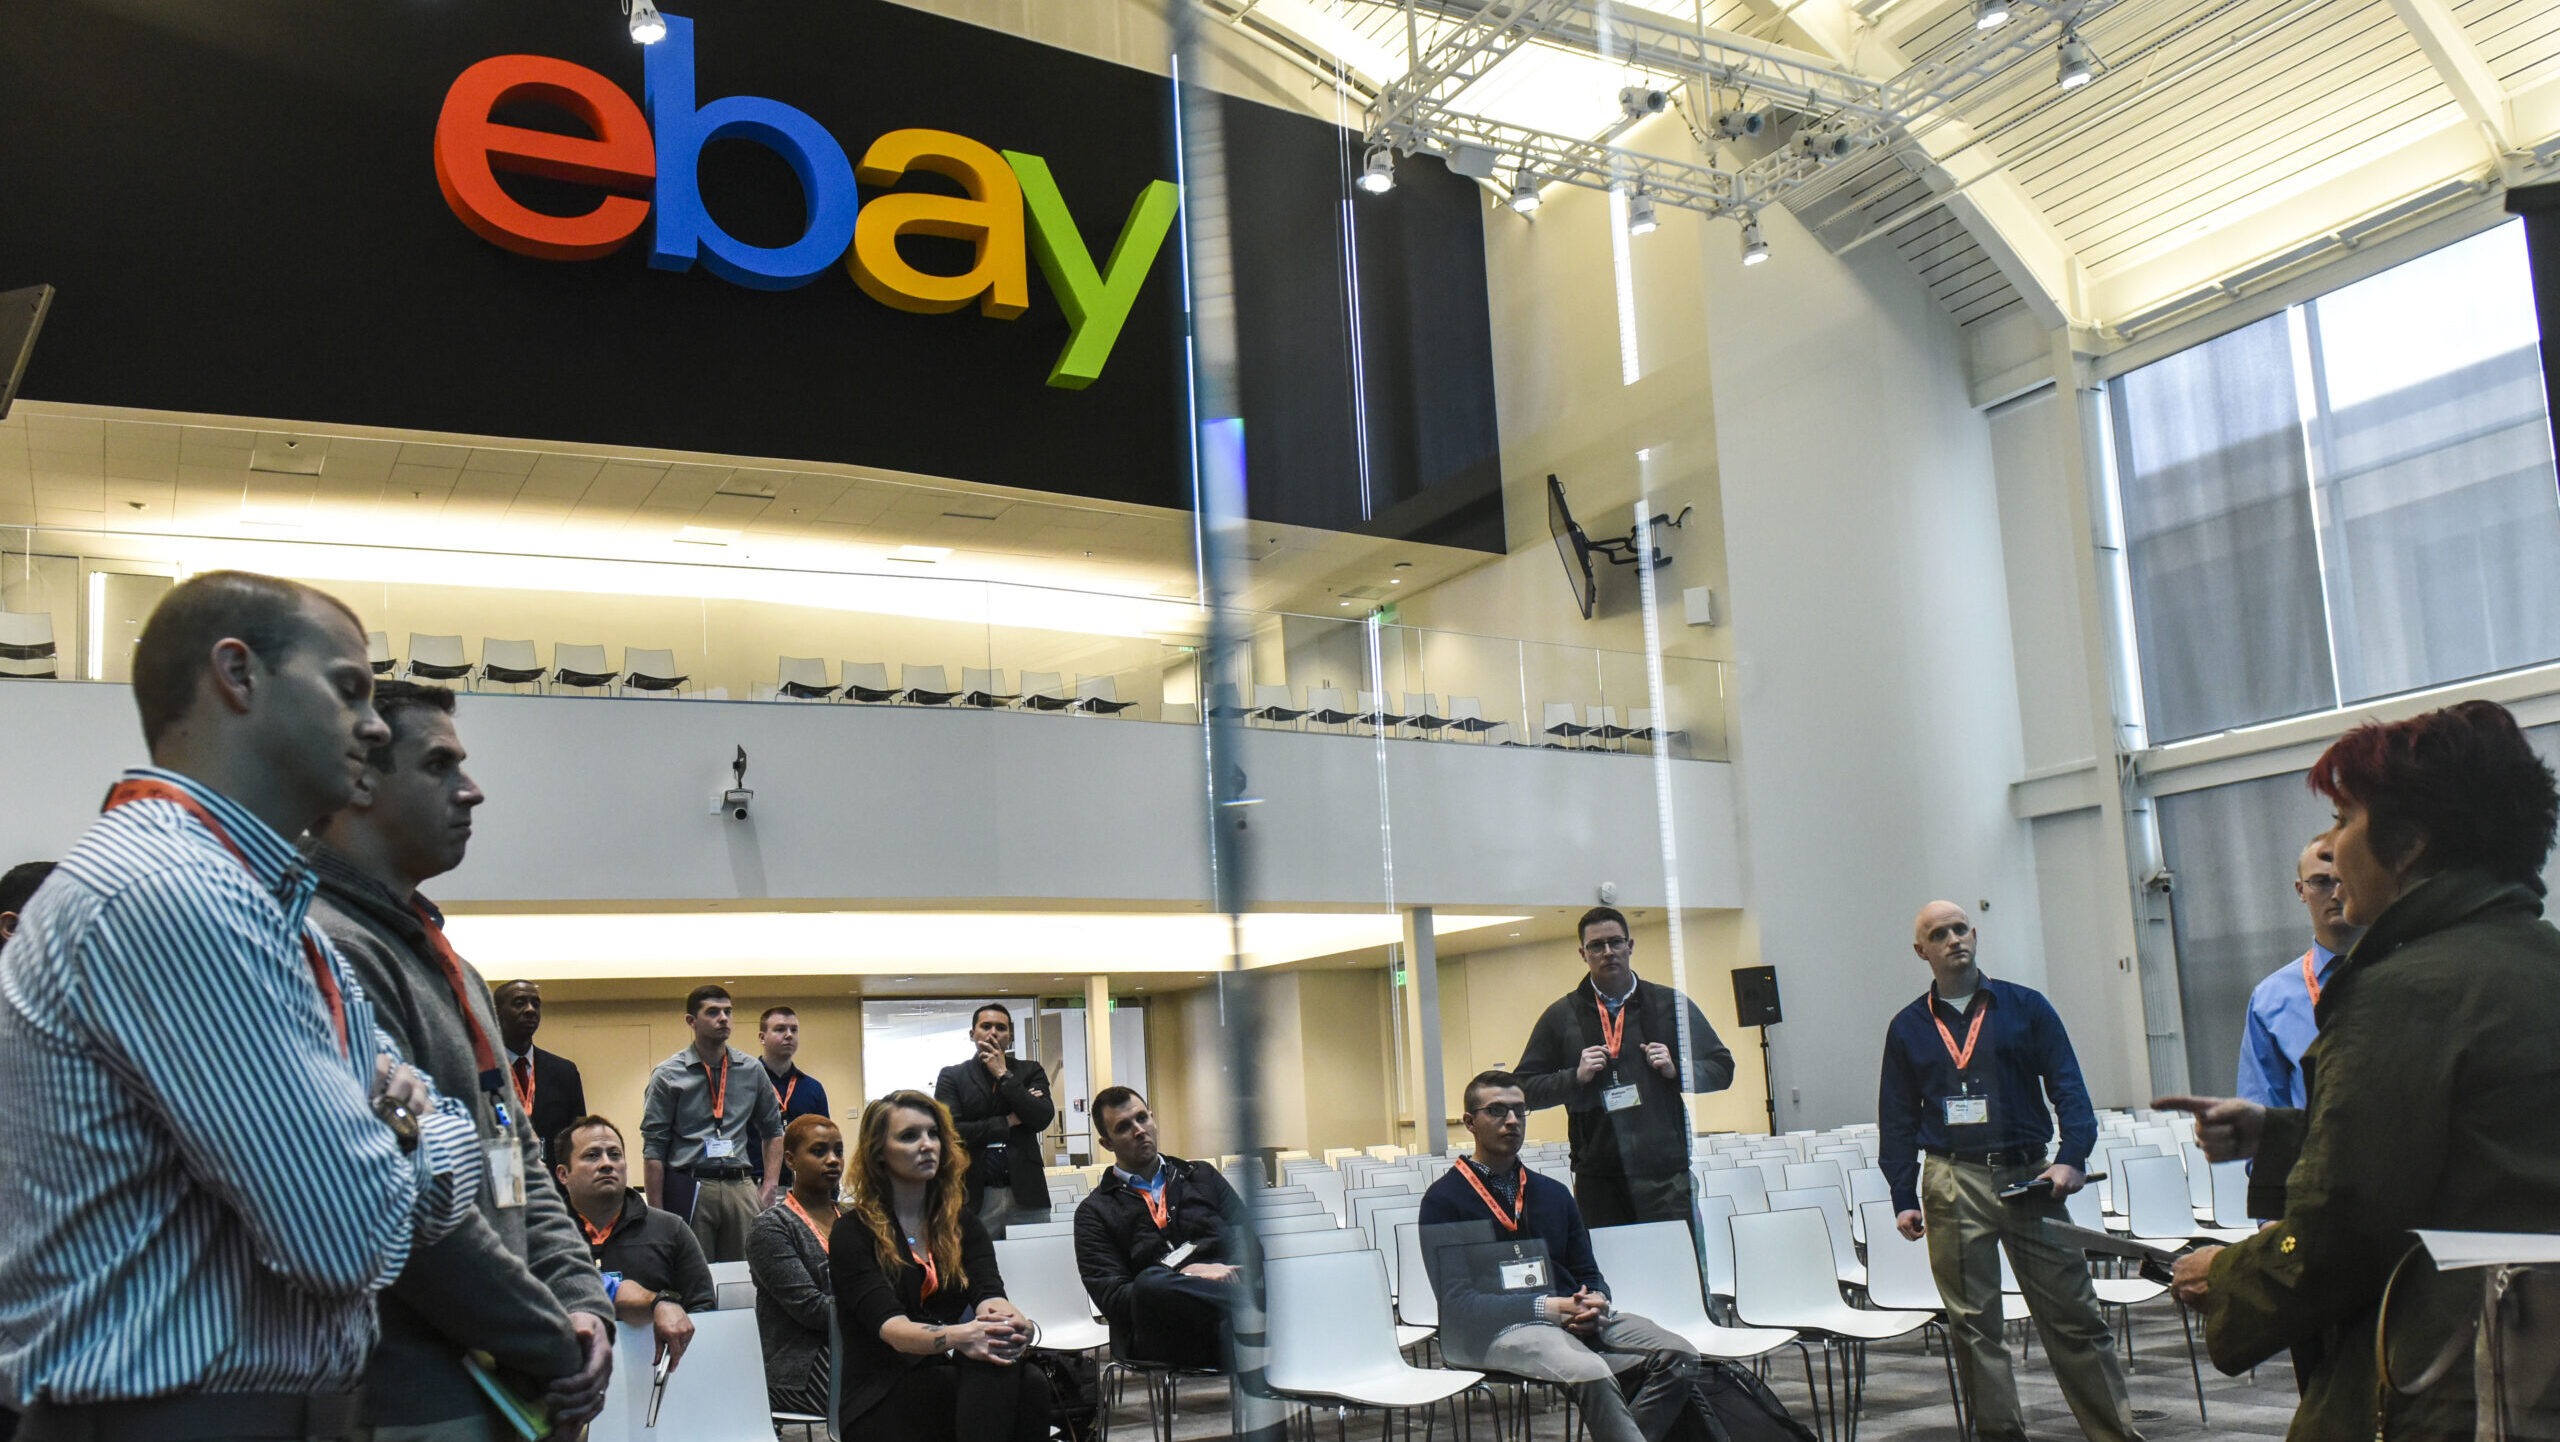 Military members wearing lanyards stand in an ebay lobby.